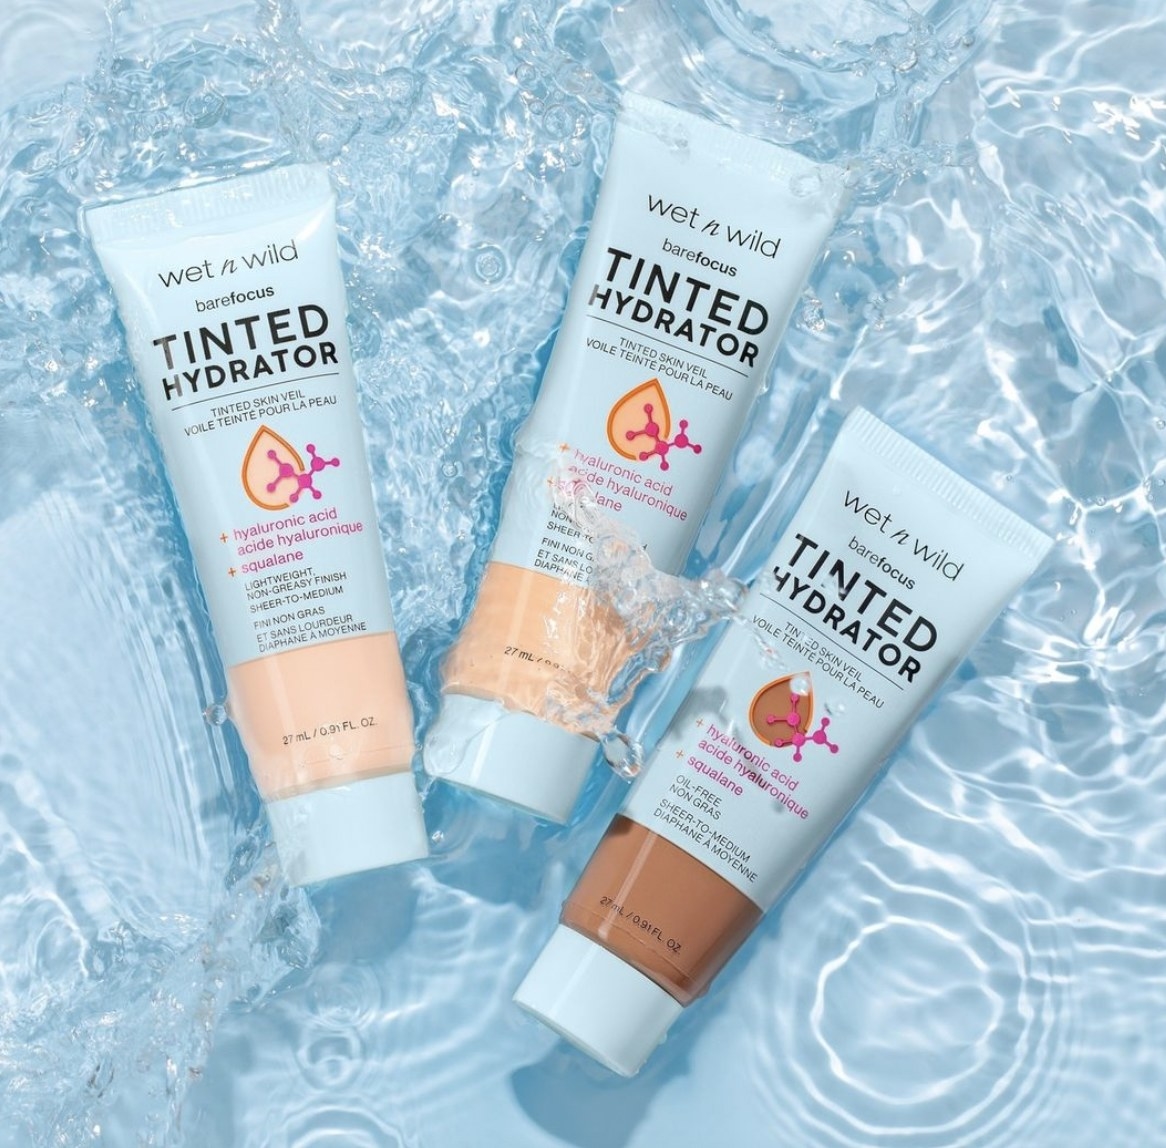 A trio of tinted moisturizers